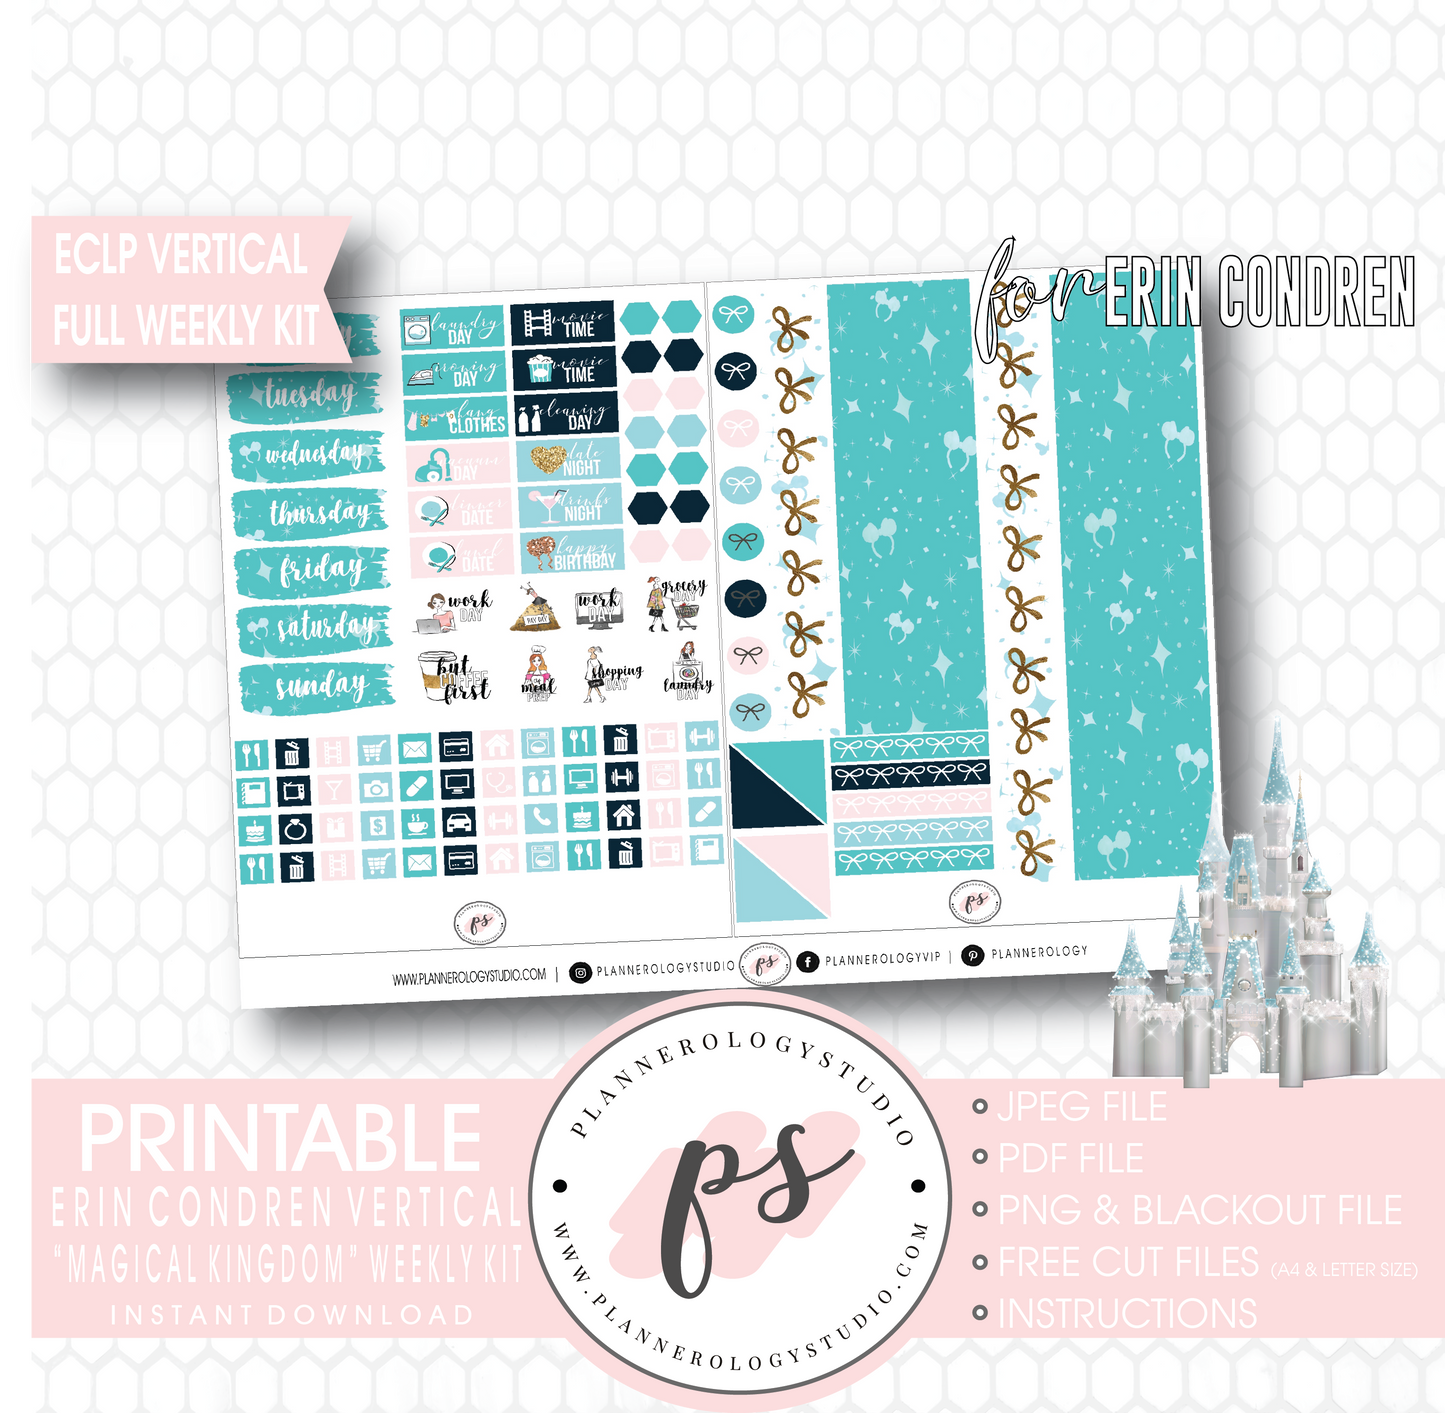 Magical Kingdom (Disney Inspired) Full Weekly Kit Printable Planner Digital Stickers (for use with Erin Condren Vertical) - Plannerologystudio